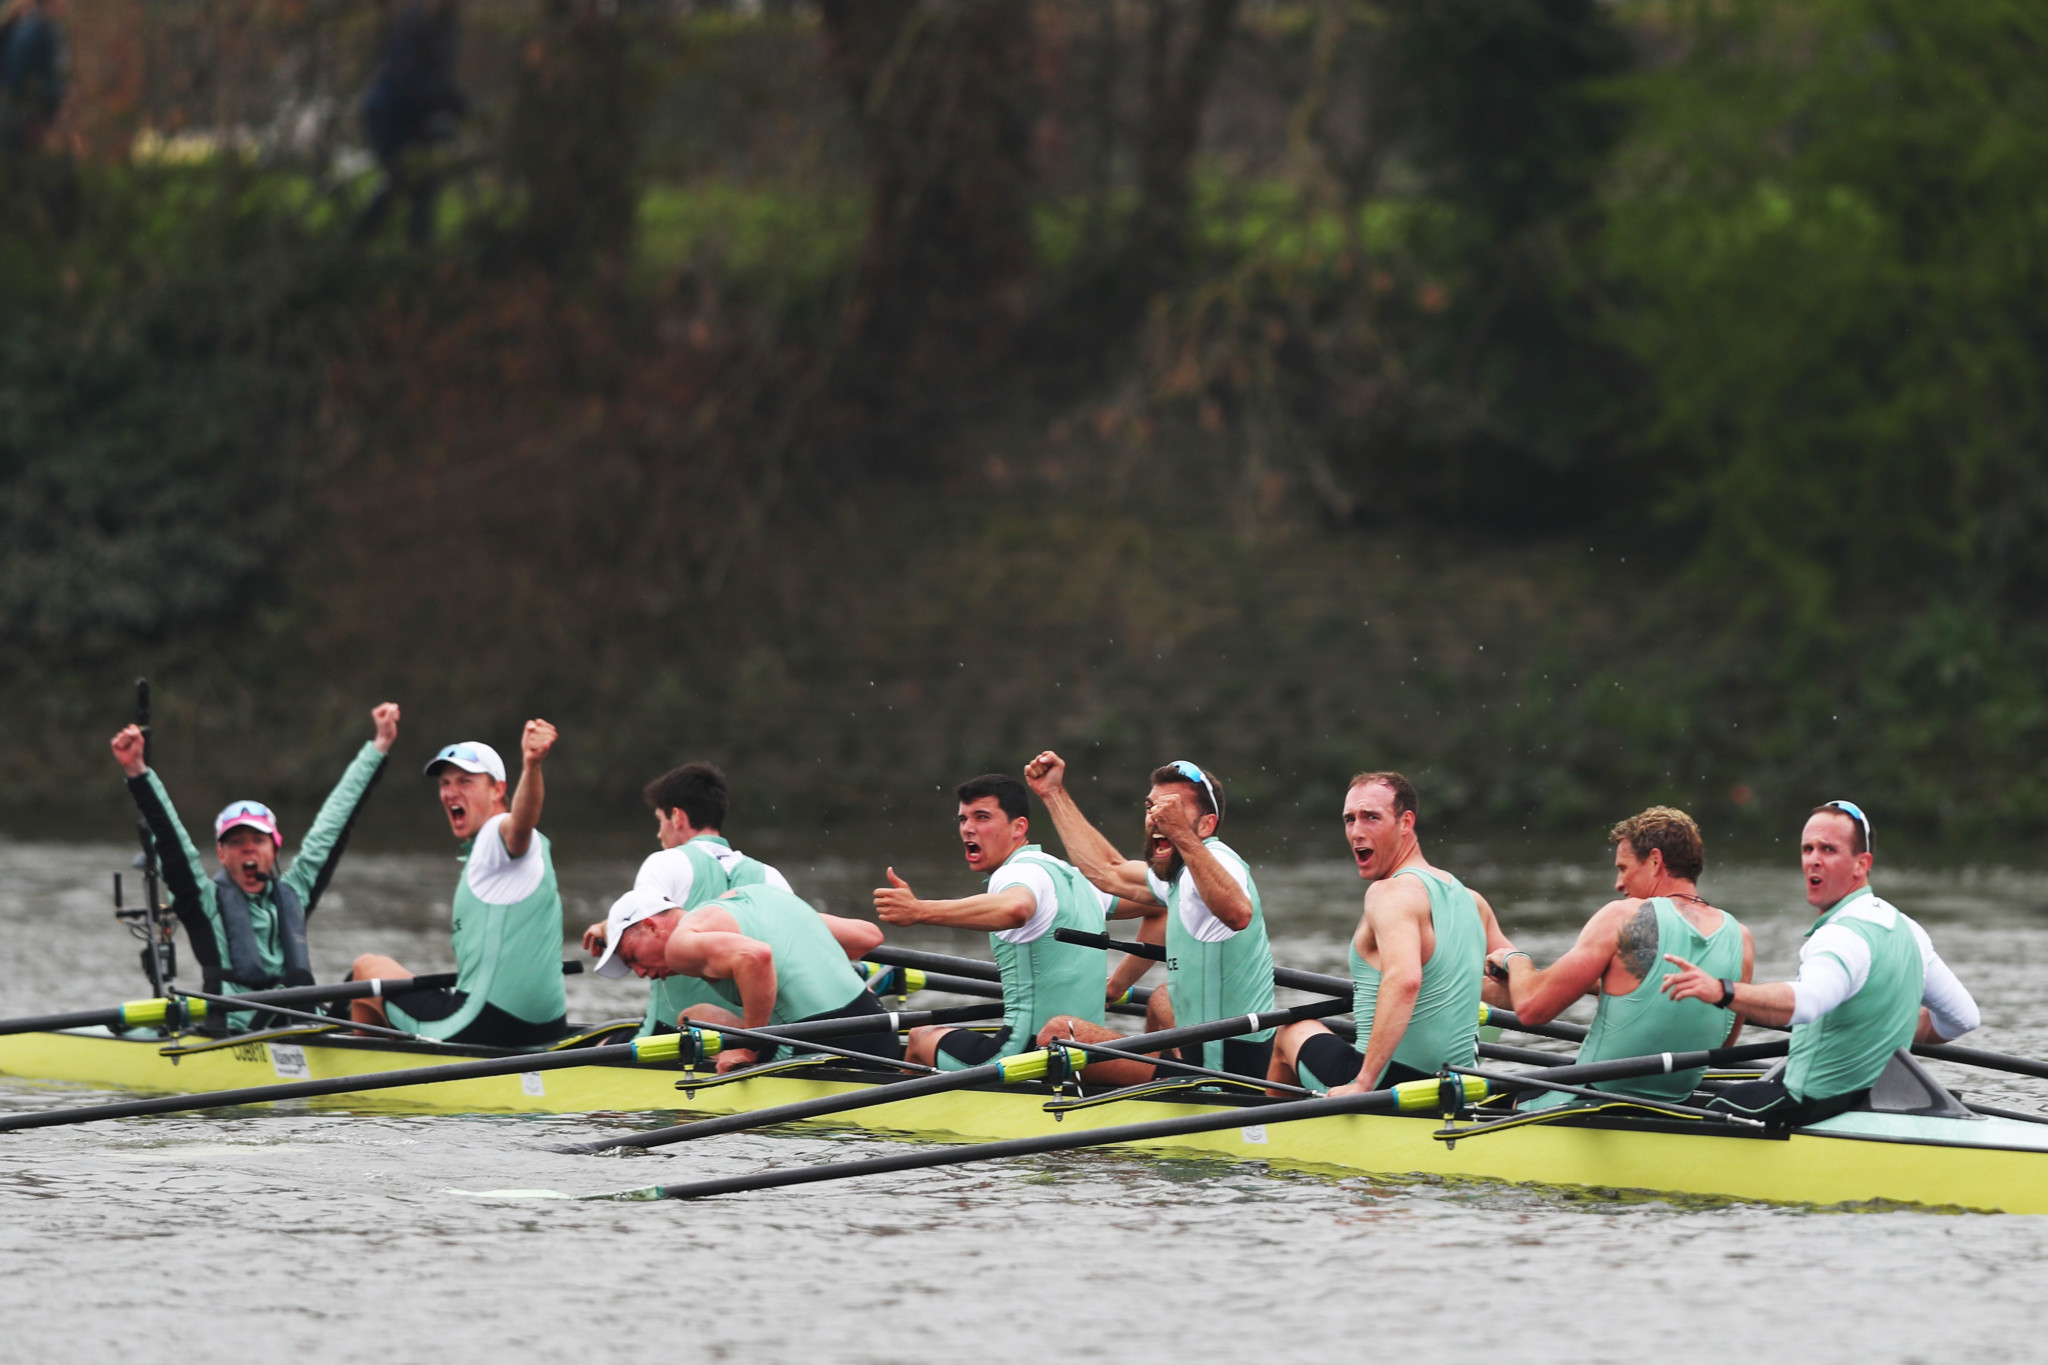 Last year, Cambridge won both the men's and women's events at the 165th Boat Race ©Getty Images